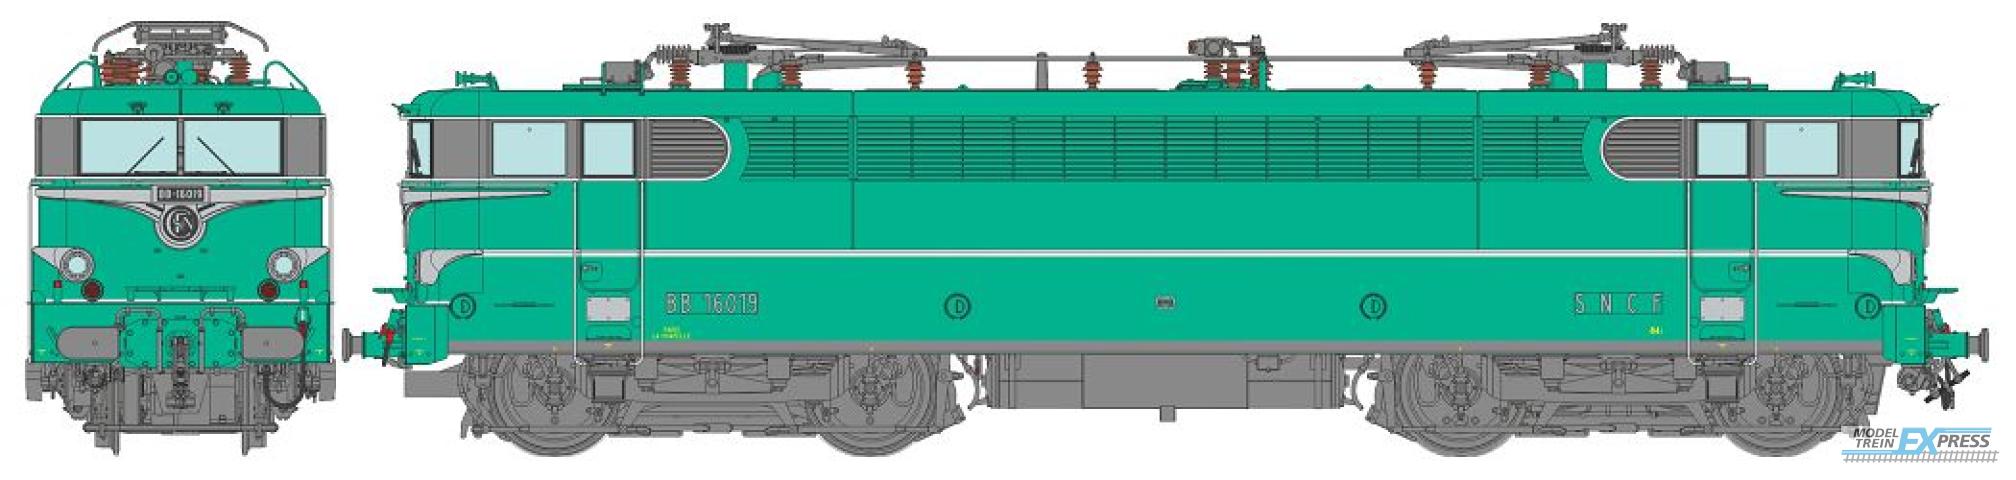 REE models MB-142S BB 16019 Green with embellishers - LA CHAPELLE - DCC Sound Functional Pantos